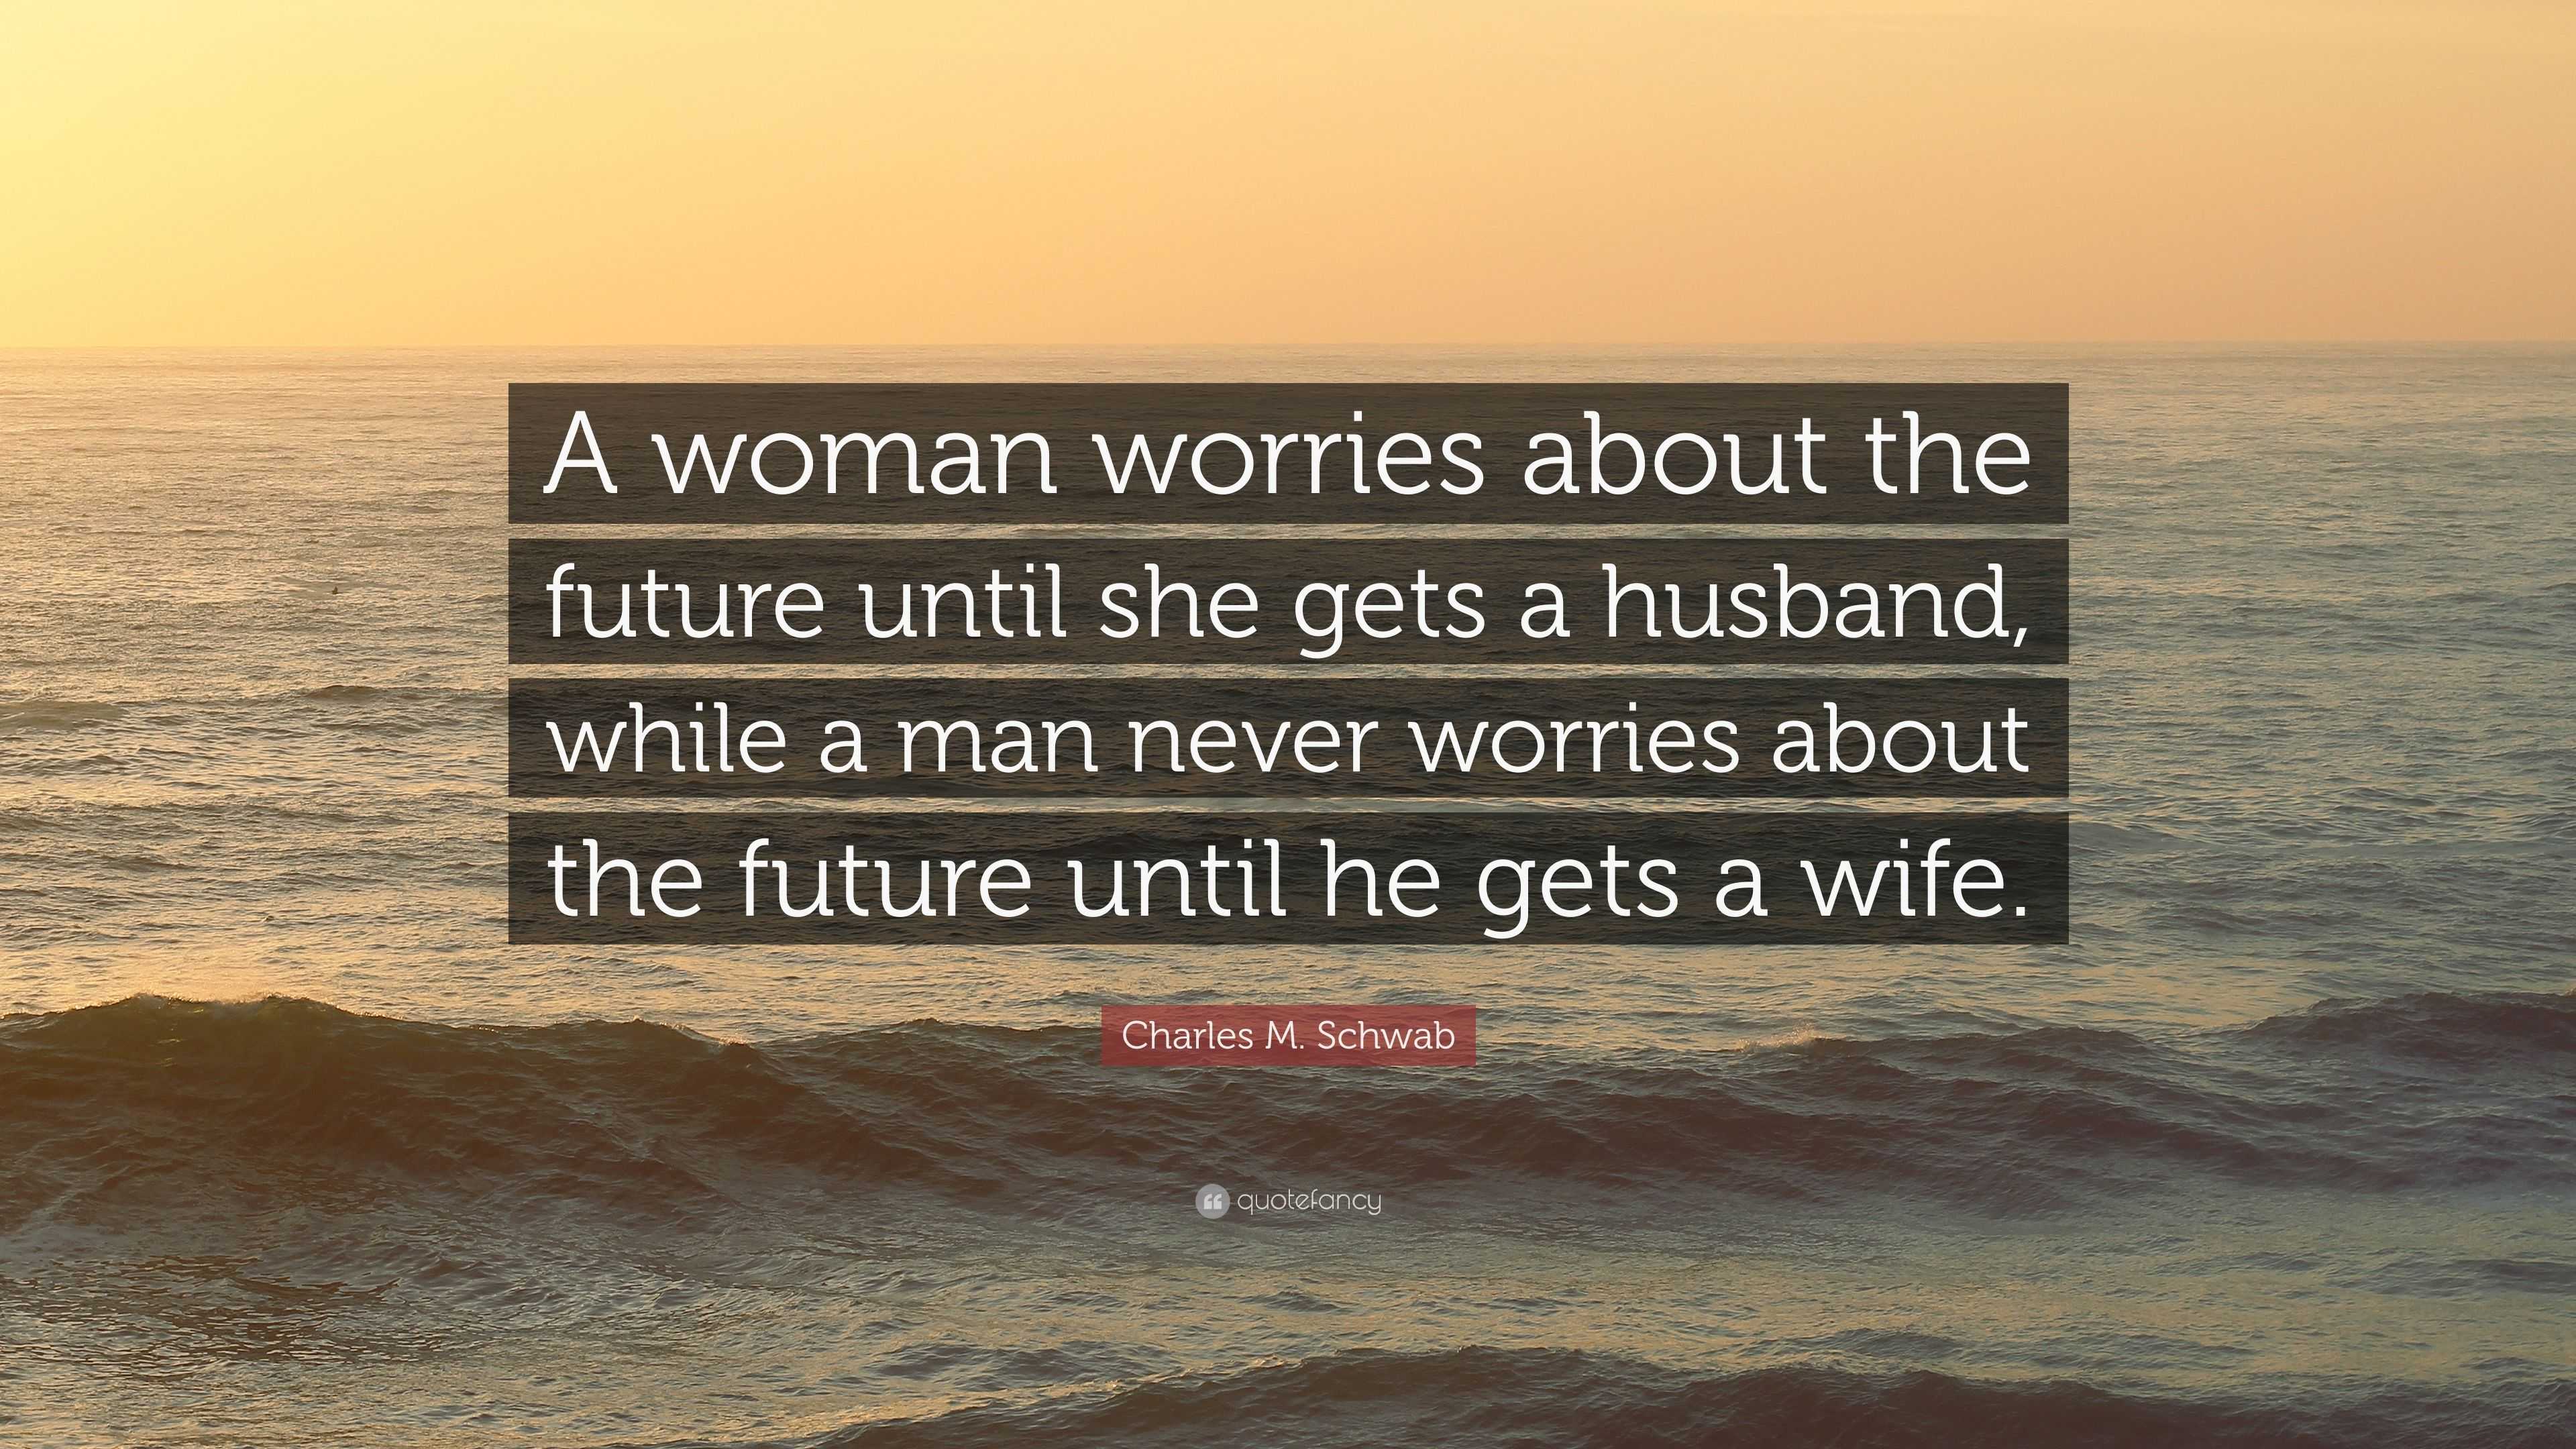 Charles M. Schwab Quote: “A woman worries about the future ...